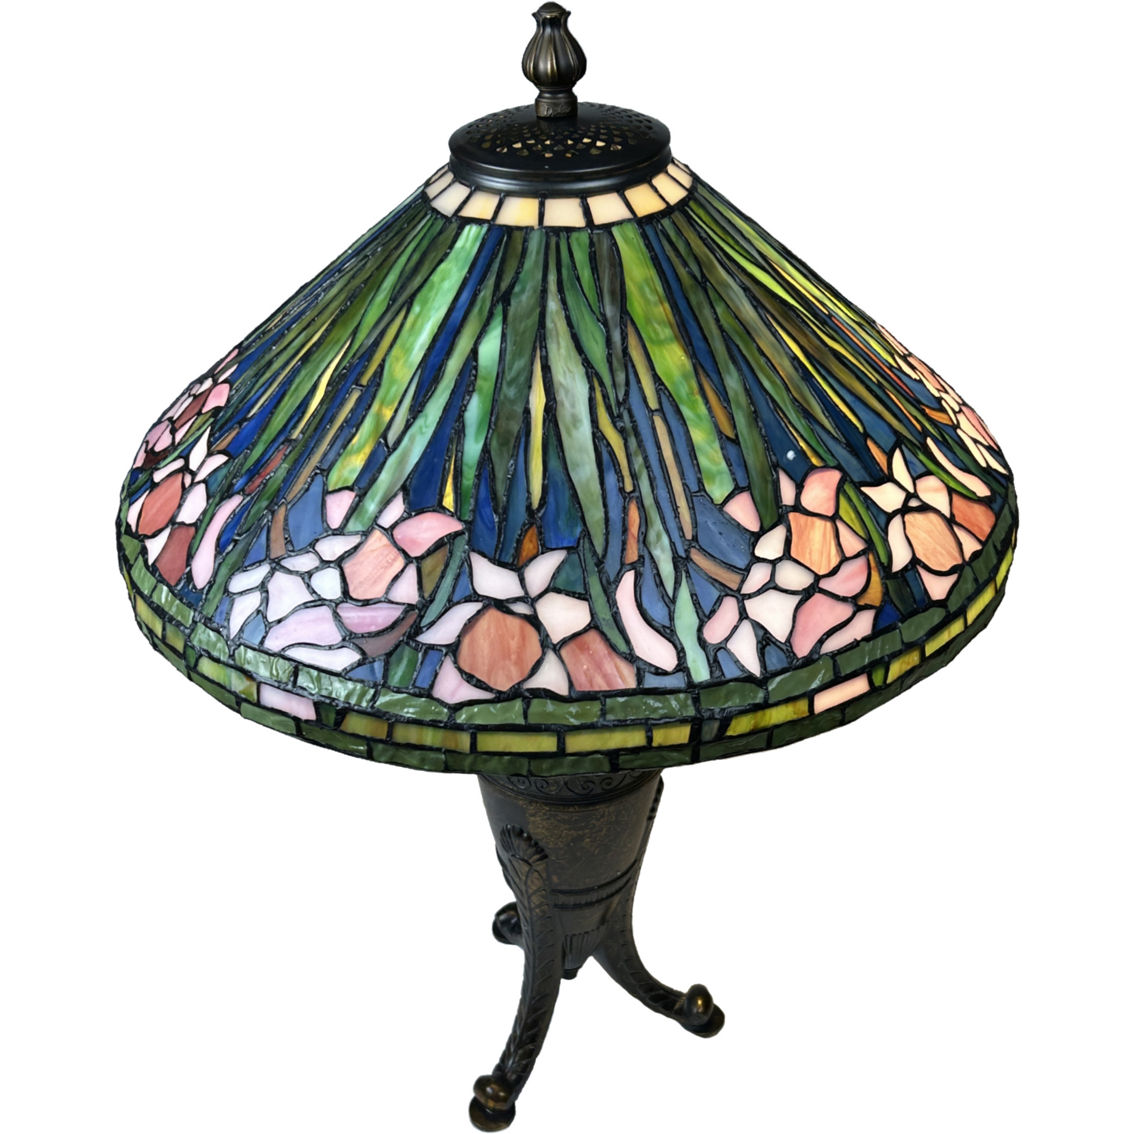 Dale Tiffany 27.5 in. Tall Pink Glades Table Lamp - Image 2 of 6